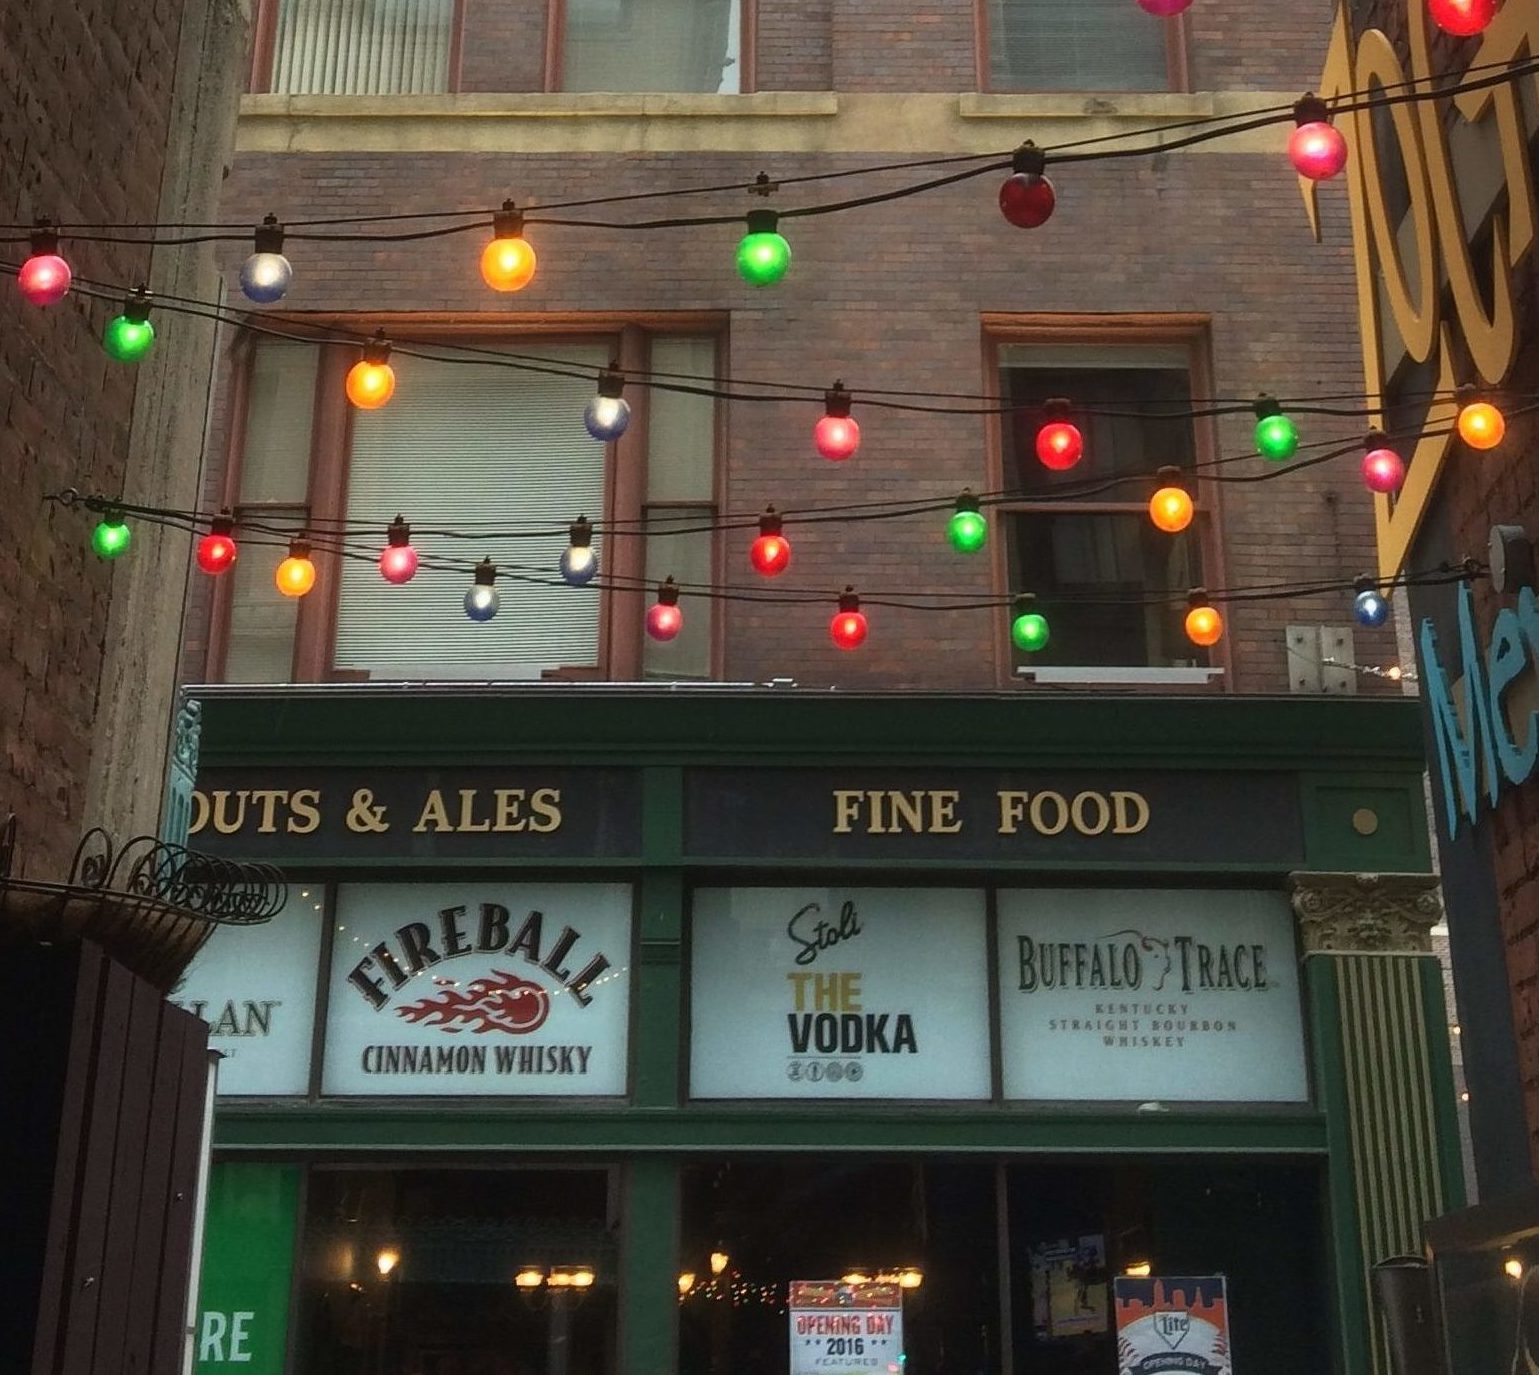 Public Houses (Pubs) and Irish Bars in Cleveland